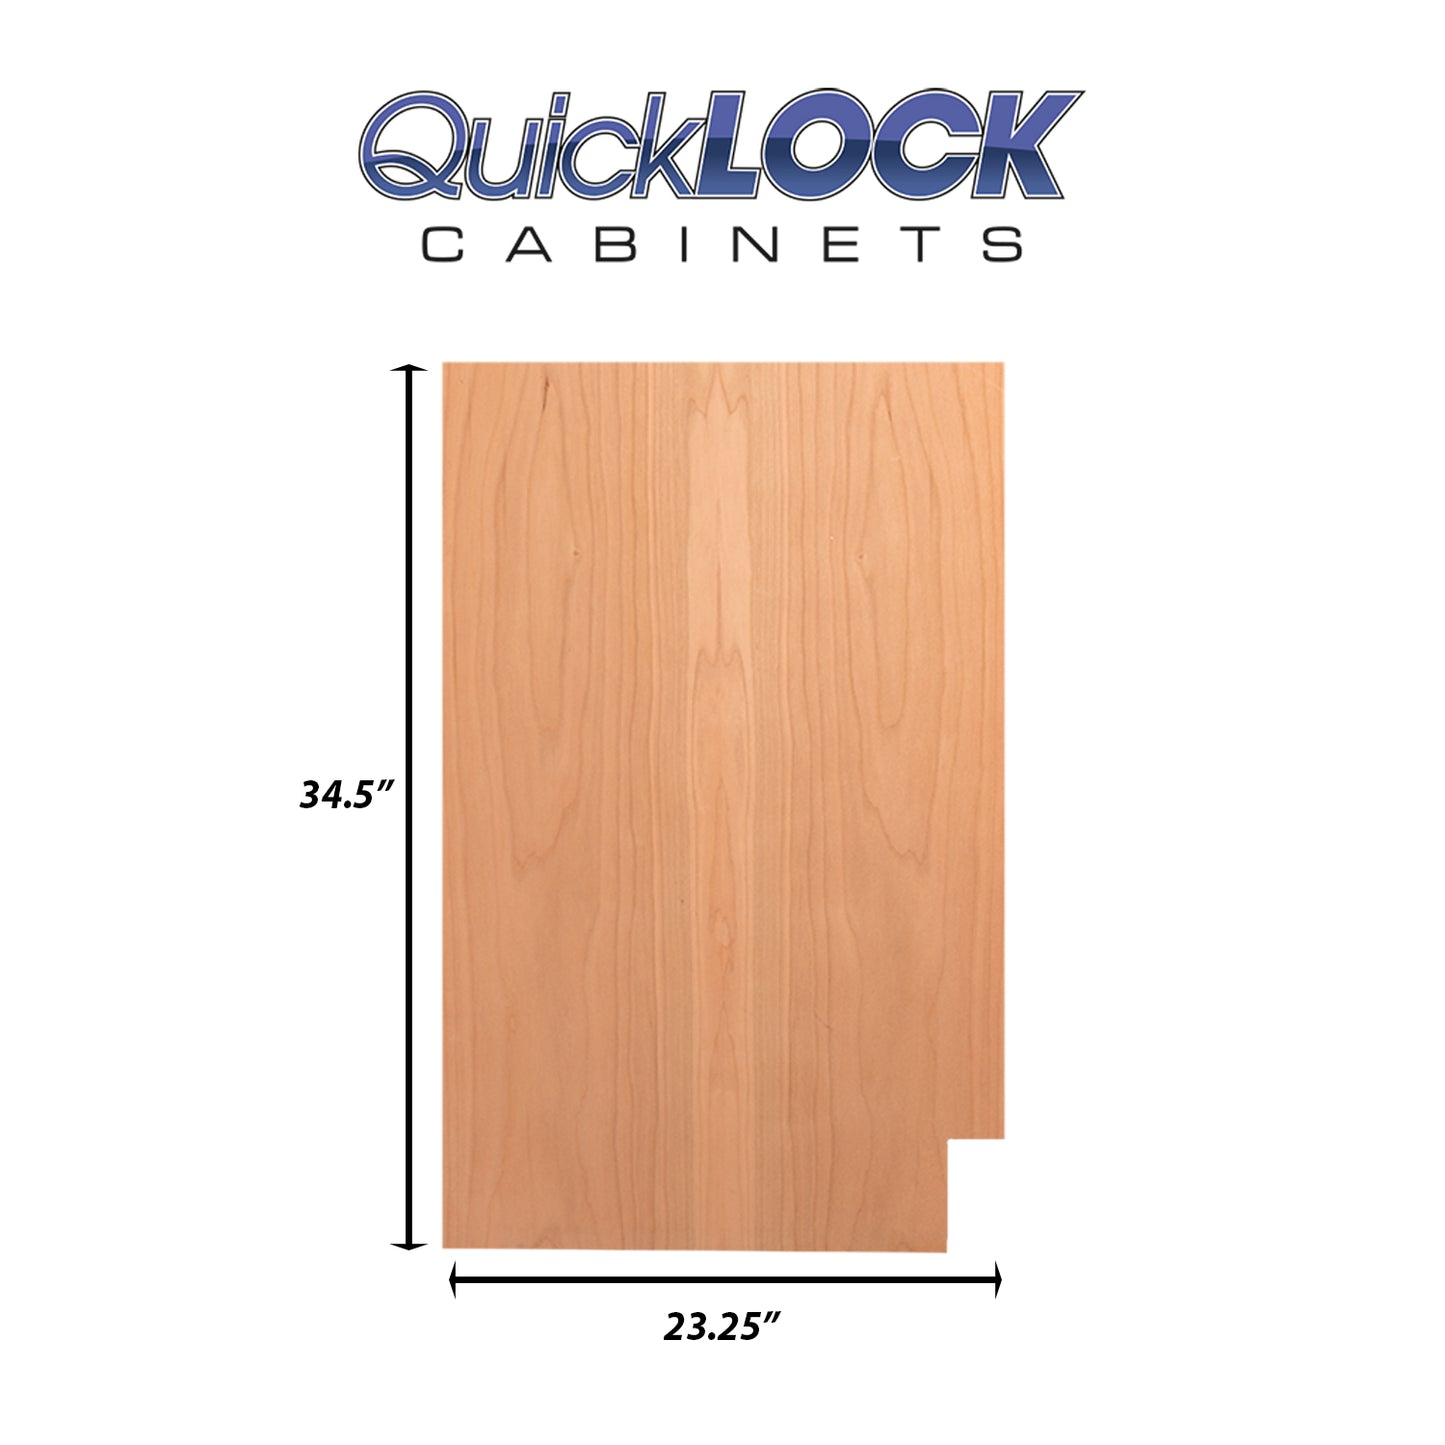 Quicklock RTA (Ready-to-Assemble) Raw Cherry .25"X23.25"X34.5" Left End Panel